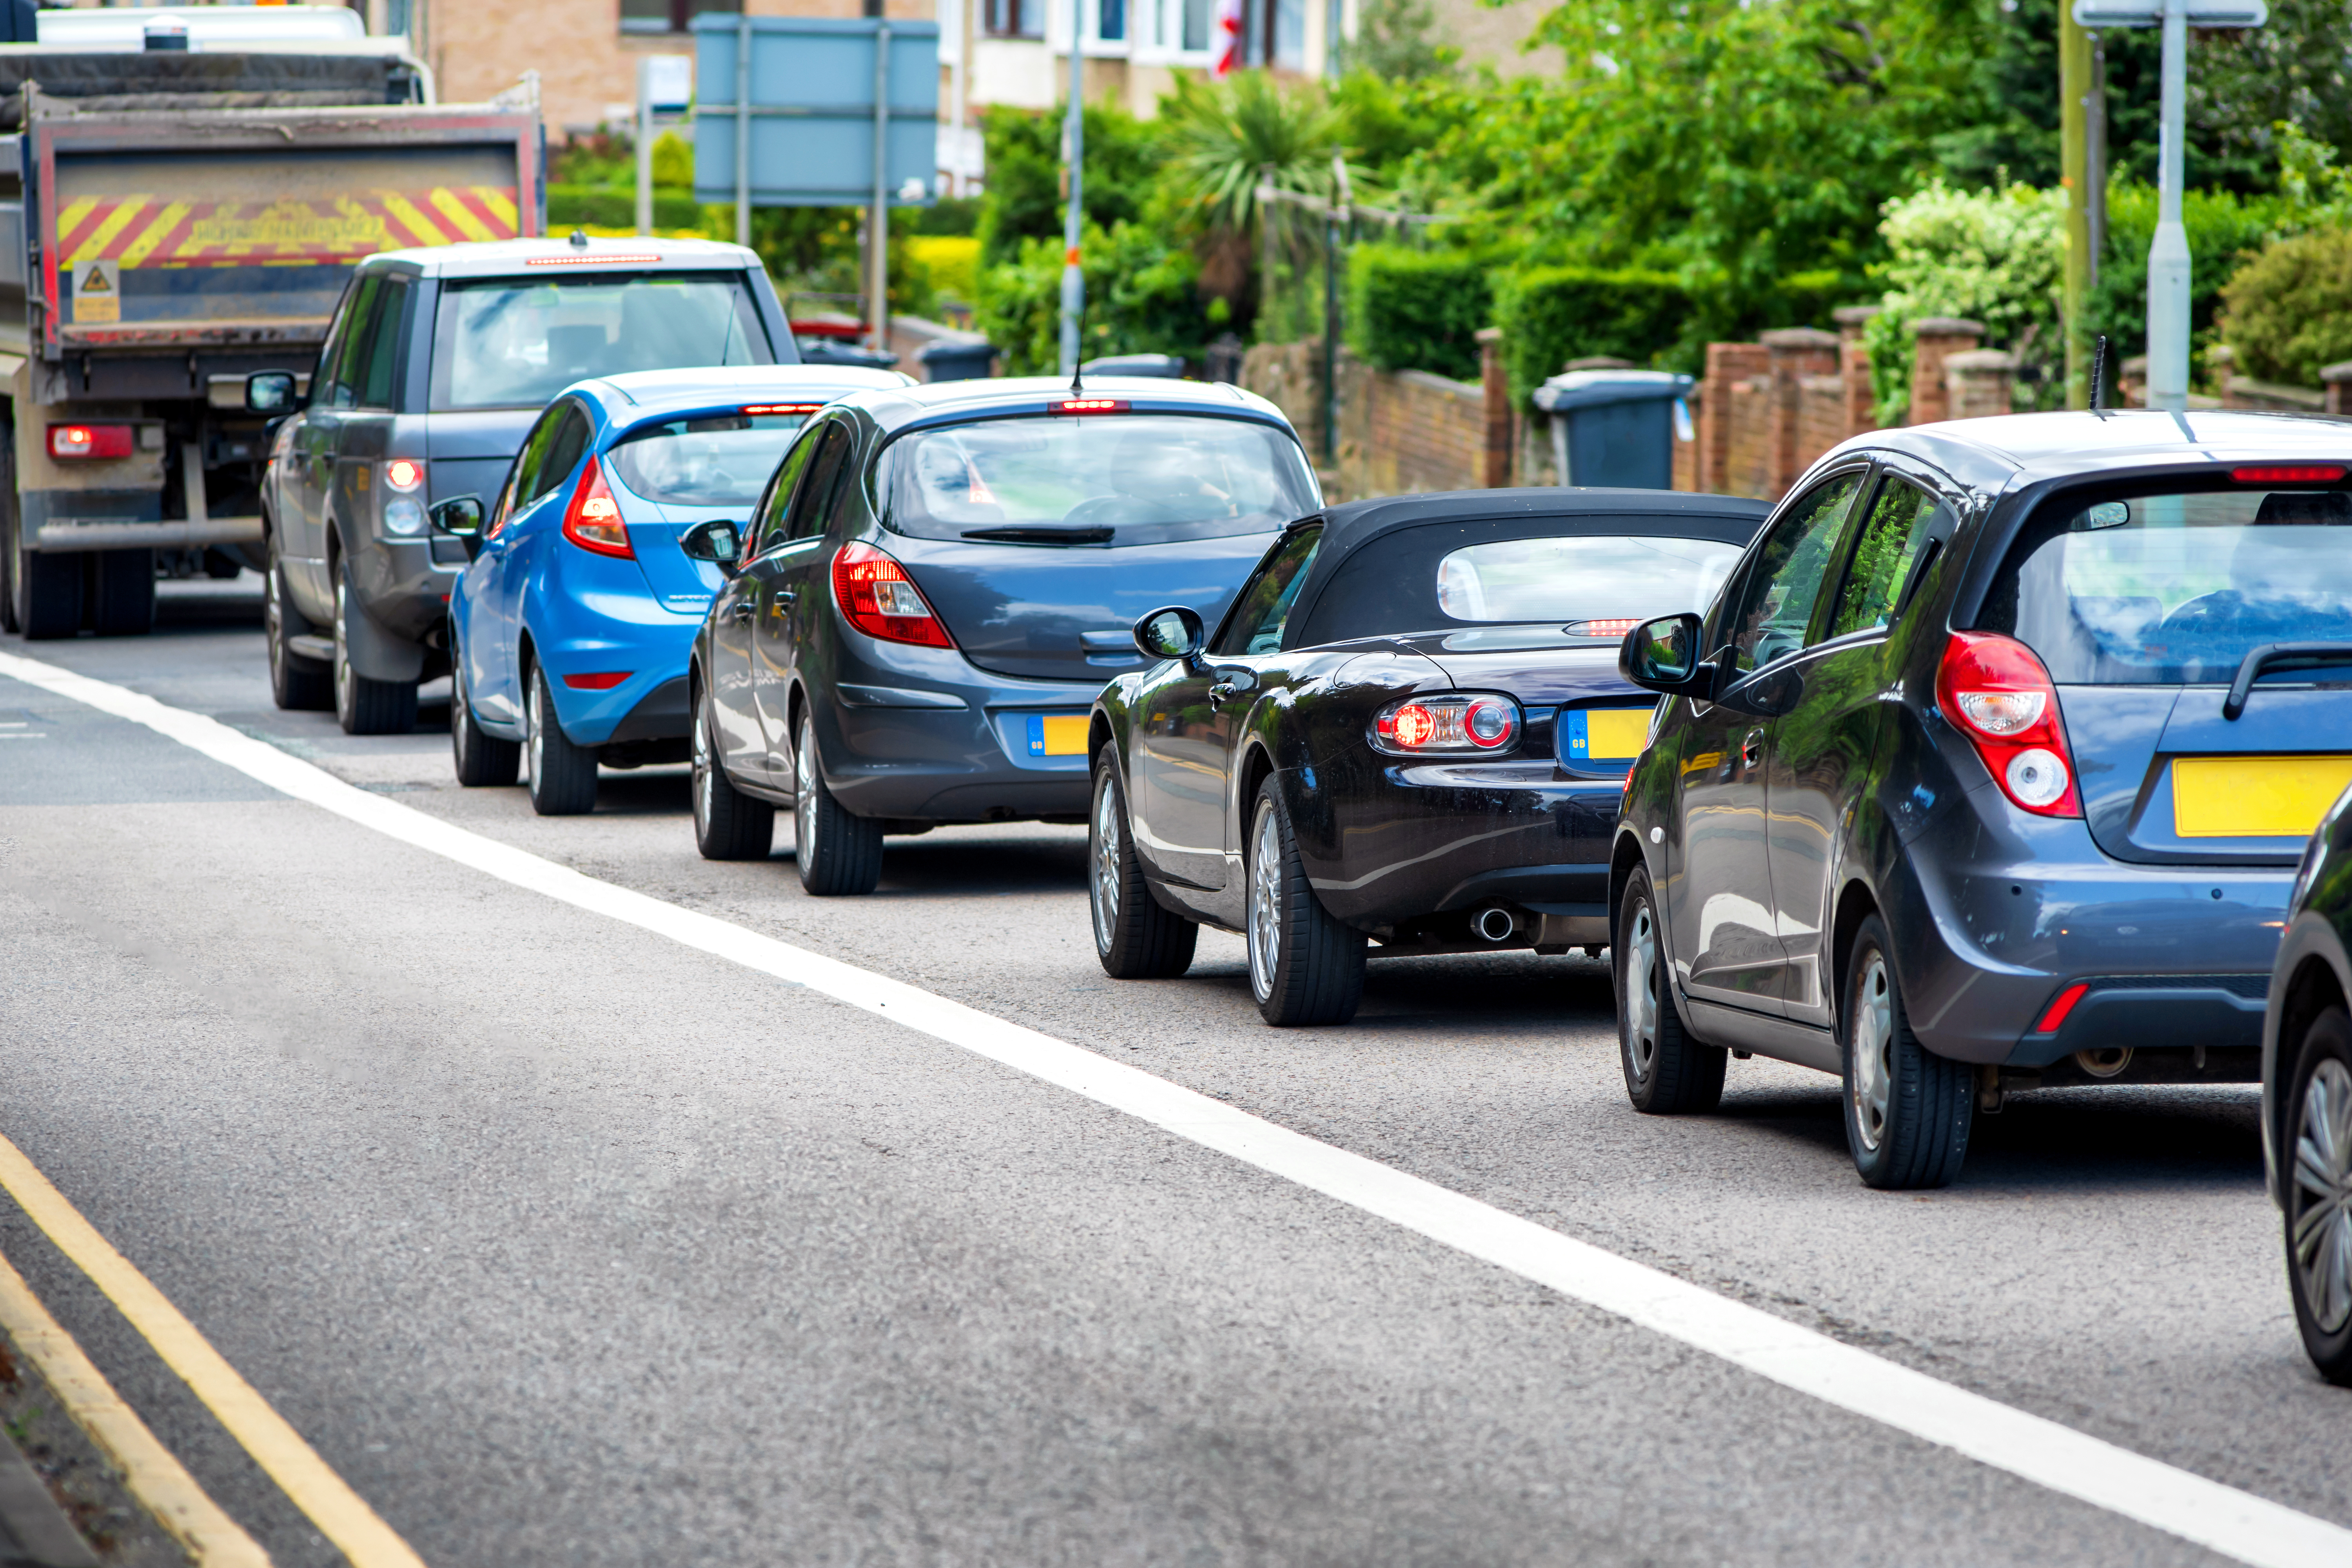 The average age of a car on UK roads is 10 years old (image source: iStock-1398986965)